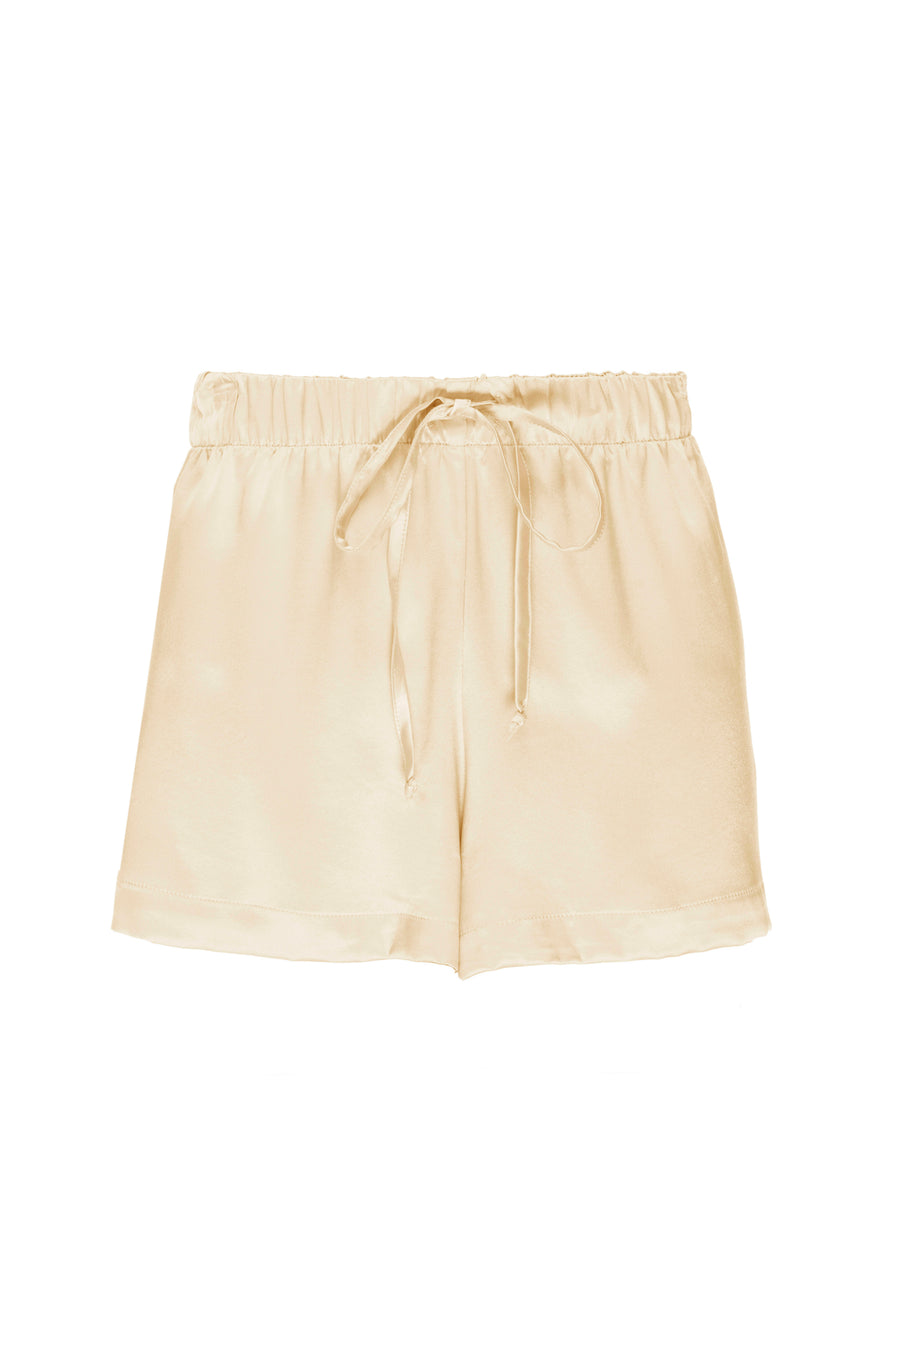 Silk Charmeuse Shorts: Butter Yellow